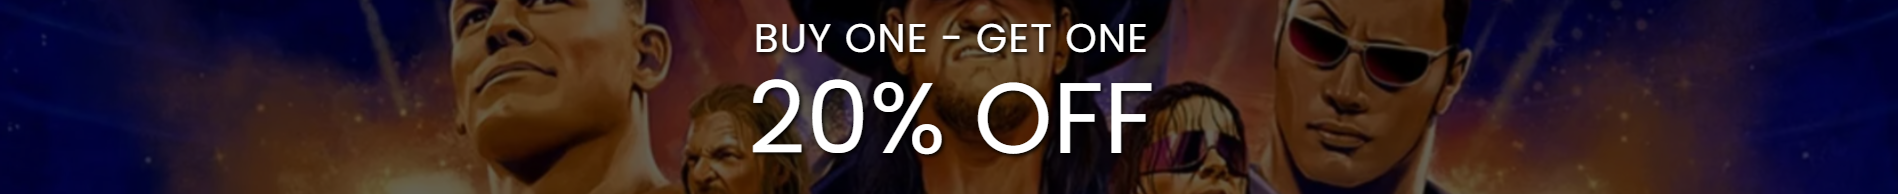 banner advertisement for Buy one get one 20% off all wrestling figures